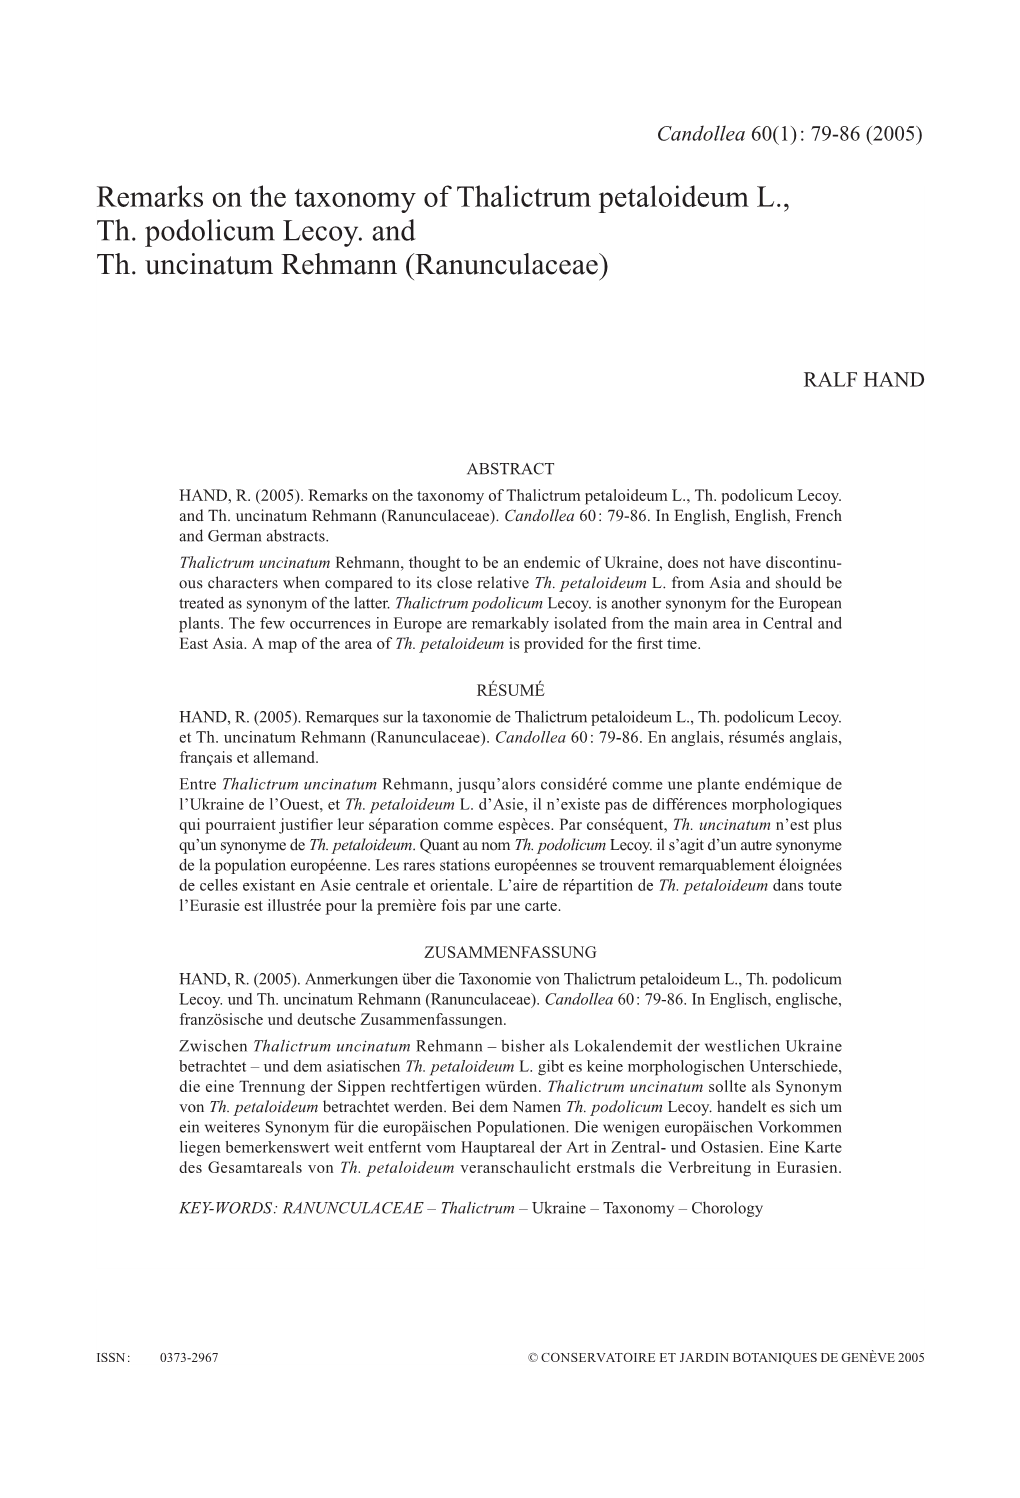 Remarks on the Taxonomy of Thalictrum Petaloideum L., Th